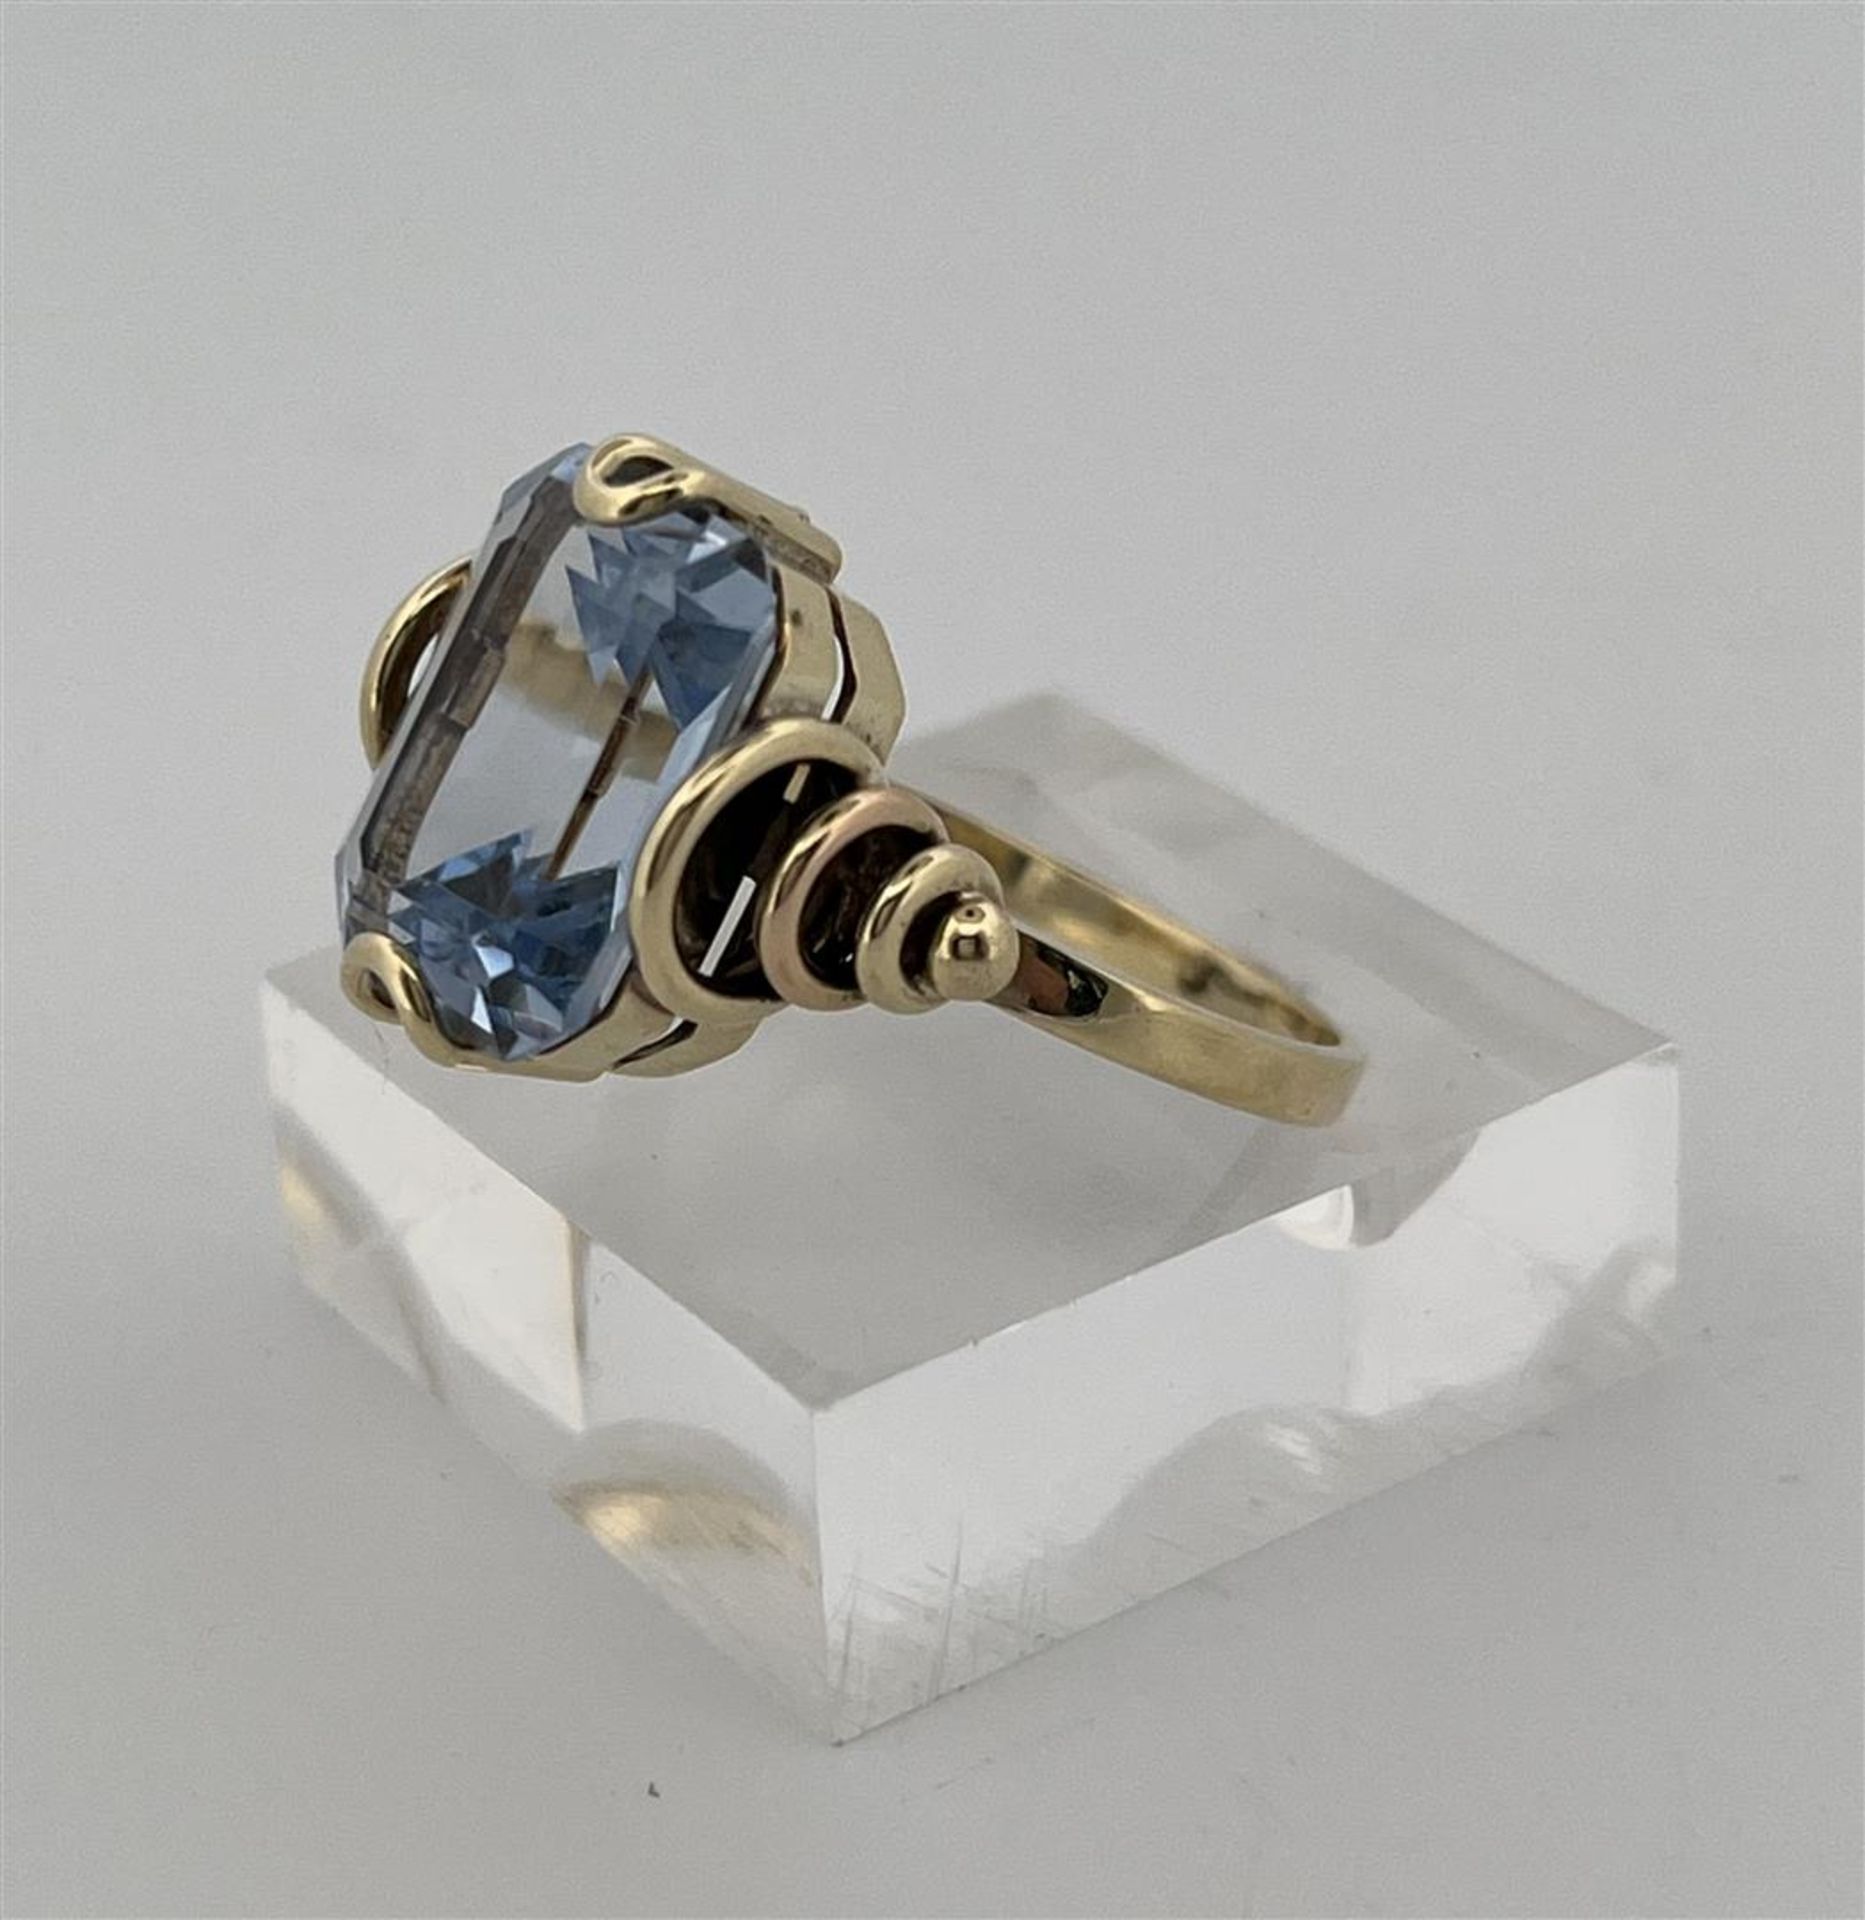 14kt yellow gold ring set with aquamarine.
The aquamarine isemerald cut measures approx. 11.8 x 8.9  - Image 8 of 11